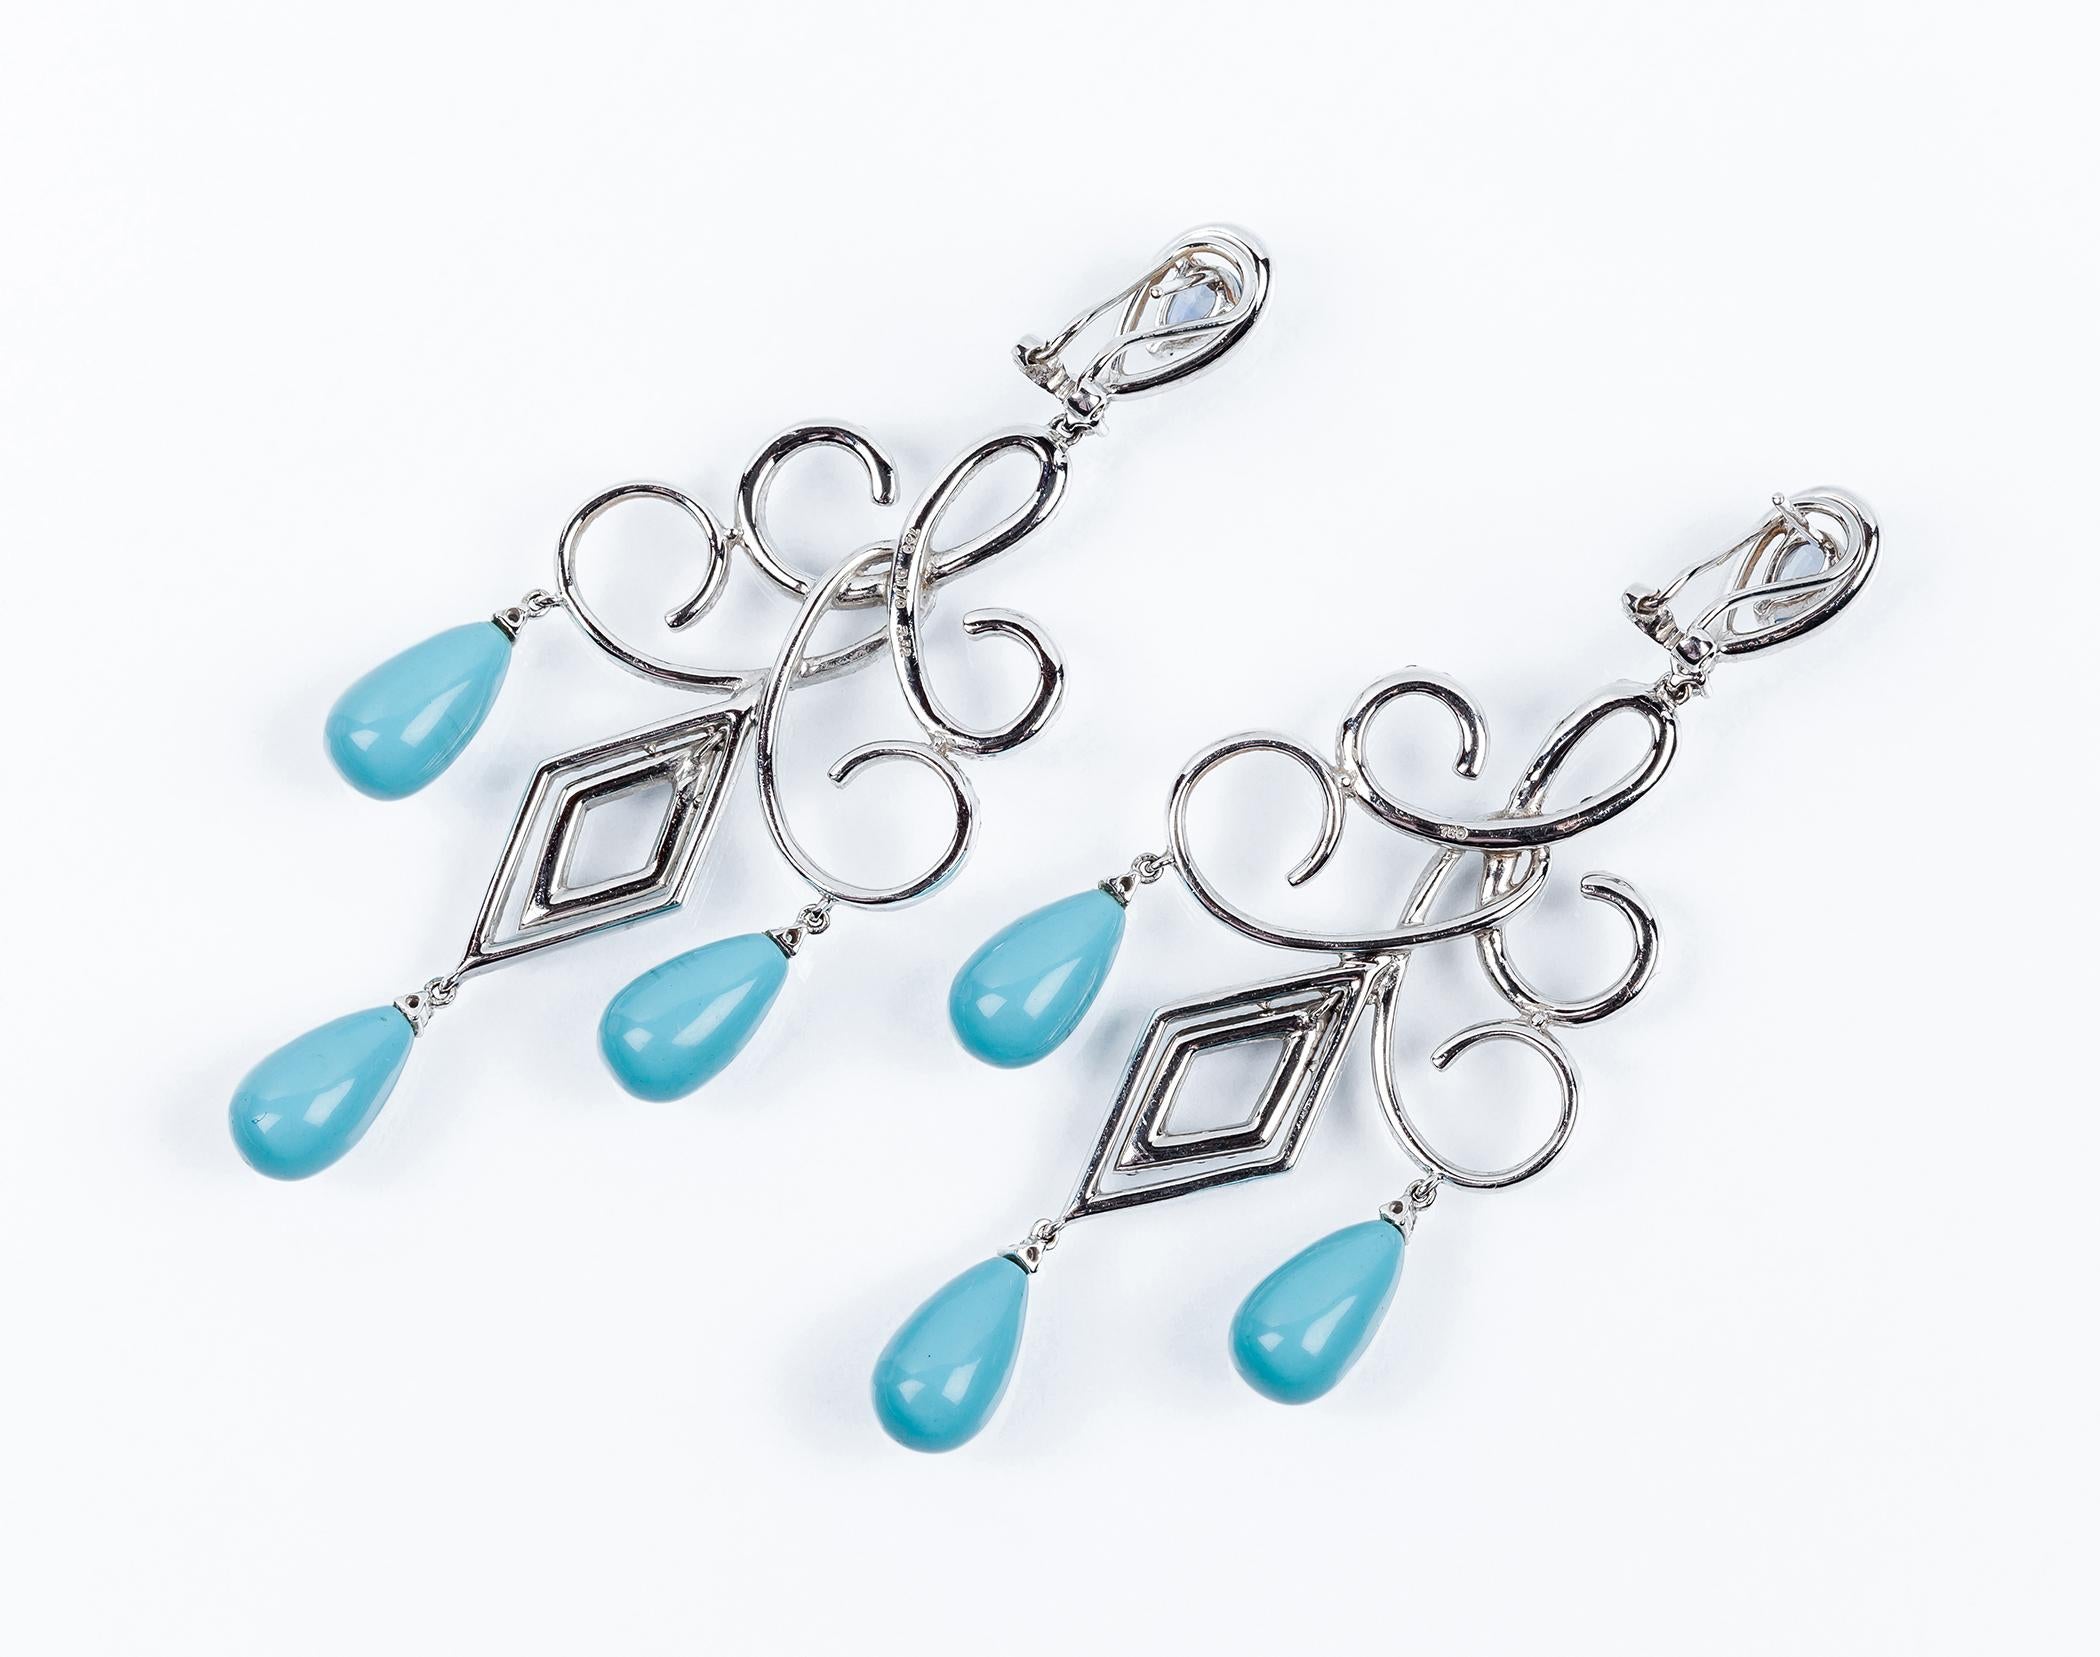 Long earrings in white gold with turquoise drops and arabesque fretwork with white diamonds and blue sapphiers.
170 Diamonds approx 1,95ct.
Length 80mm / 3.14in.
Weight 21,1 gr total 
Irama Pradera is a Young designer from Spain that searches always